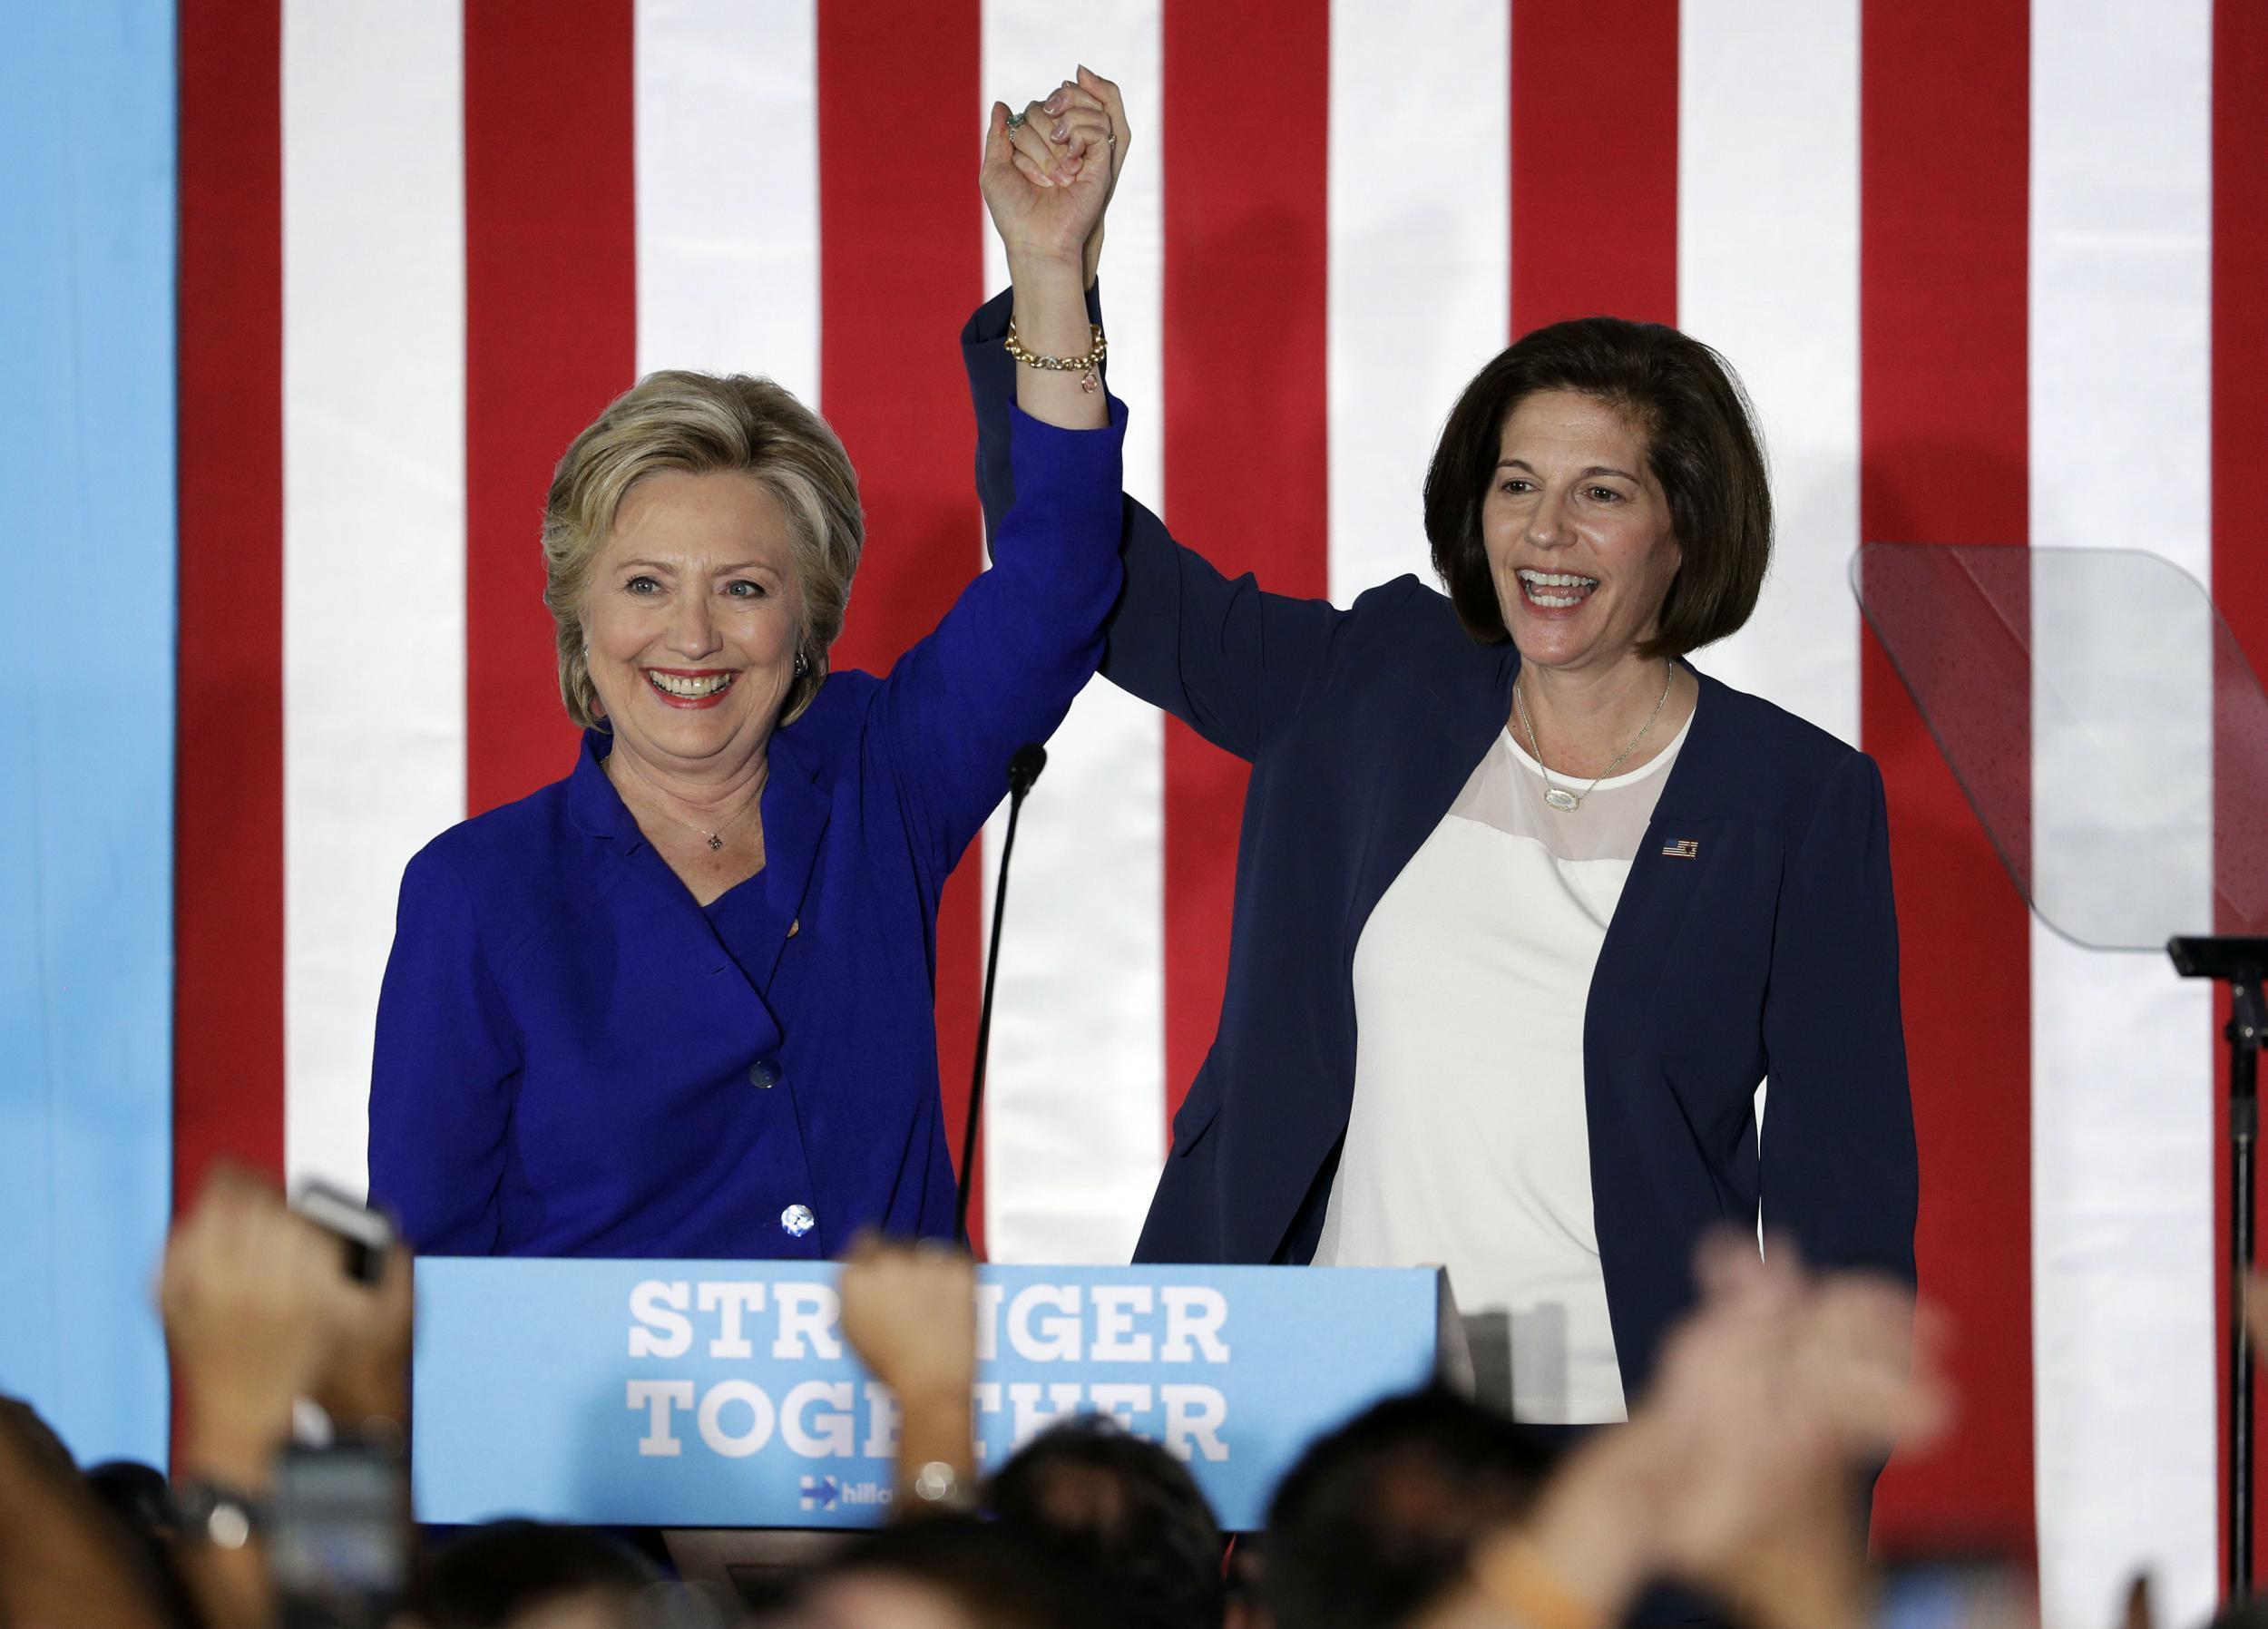 Democrat Catherine Cortez Masto,looks set to beat Republican Joe Heck to the US Senate seat in Nevada, partly because of a surge in Hispanic voting in the battleground seat